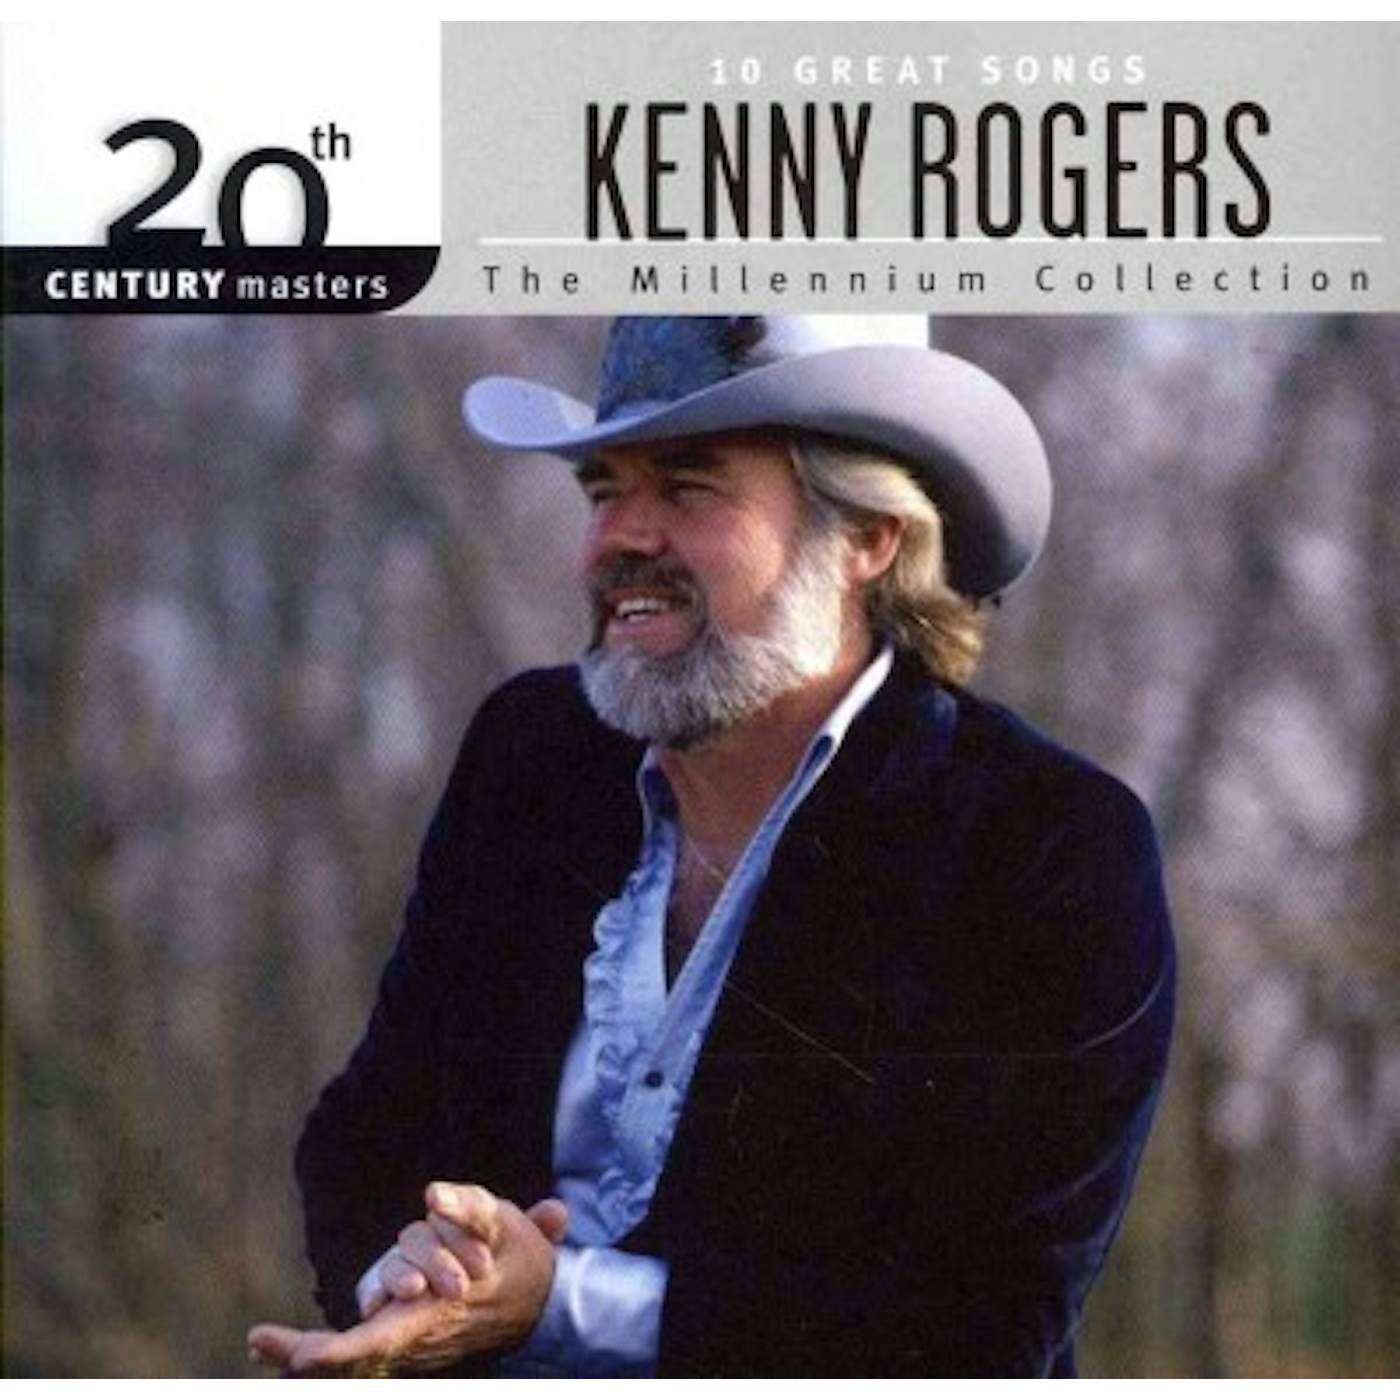 Kenny Rogers MILLENNIUM COLLECTION: 20TH CENTURY MASTERS CD